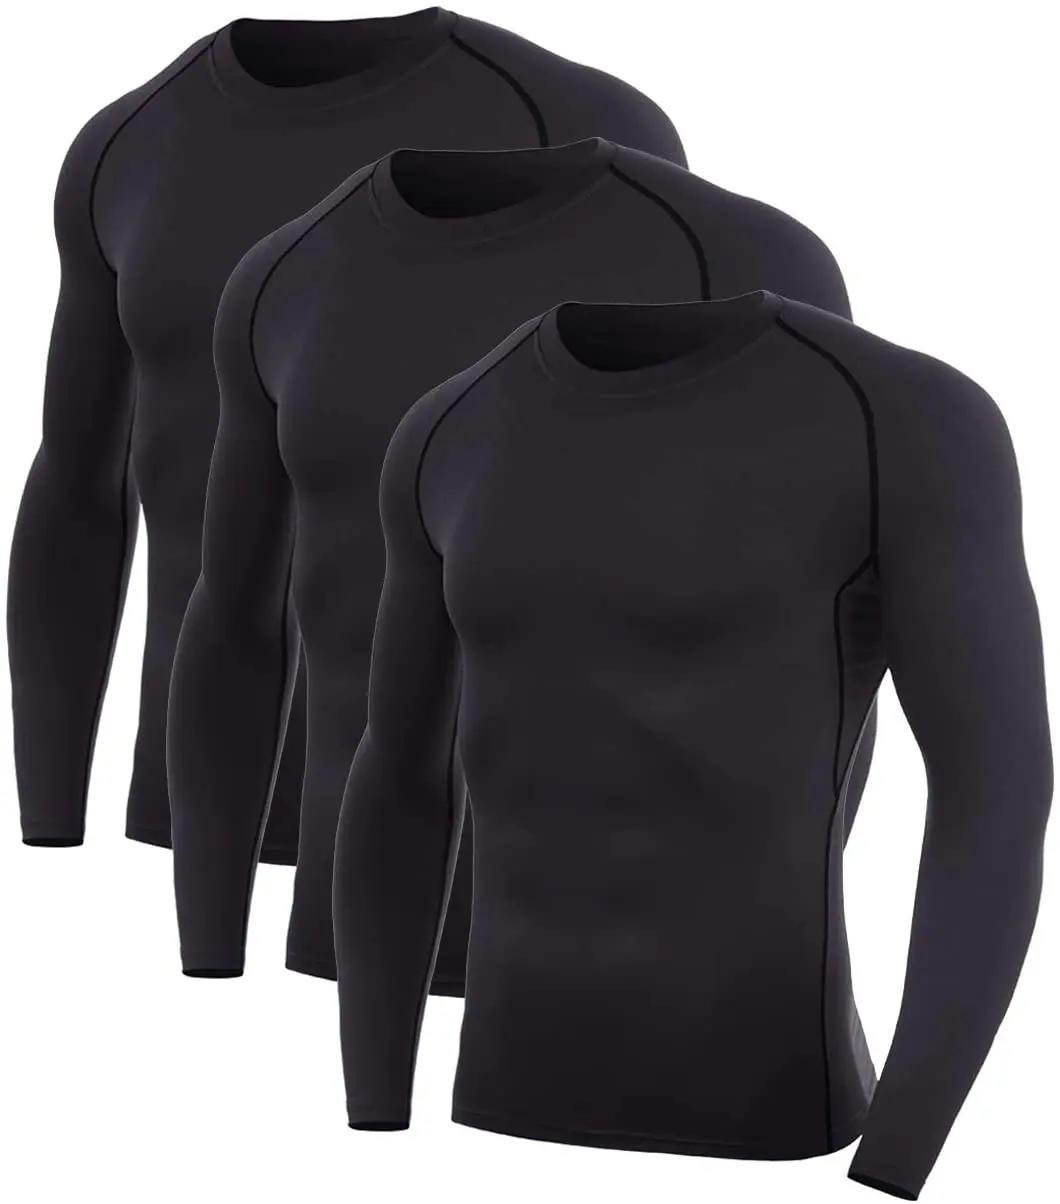 Wholesale Men's Long Sleeve Compression Shirt Base Layer Workout Fitness Running Shirts Top Men's Gym Wears